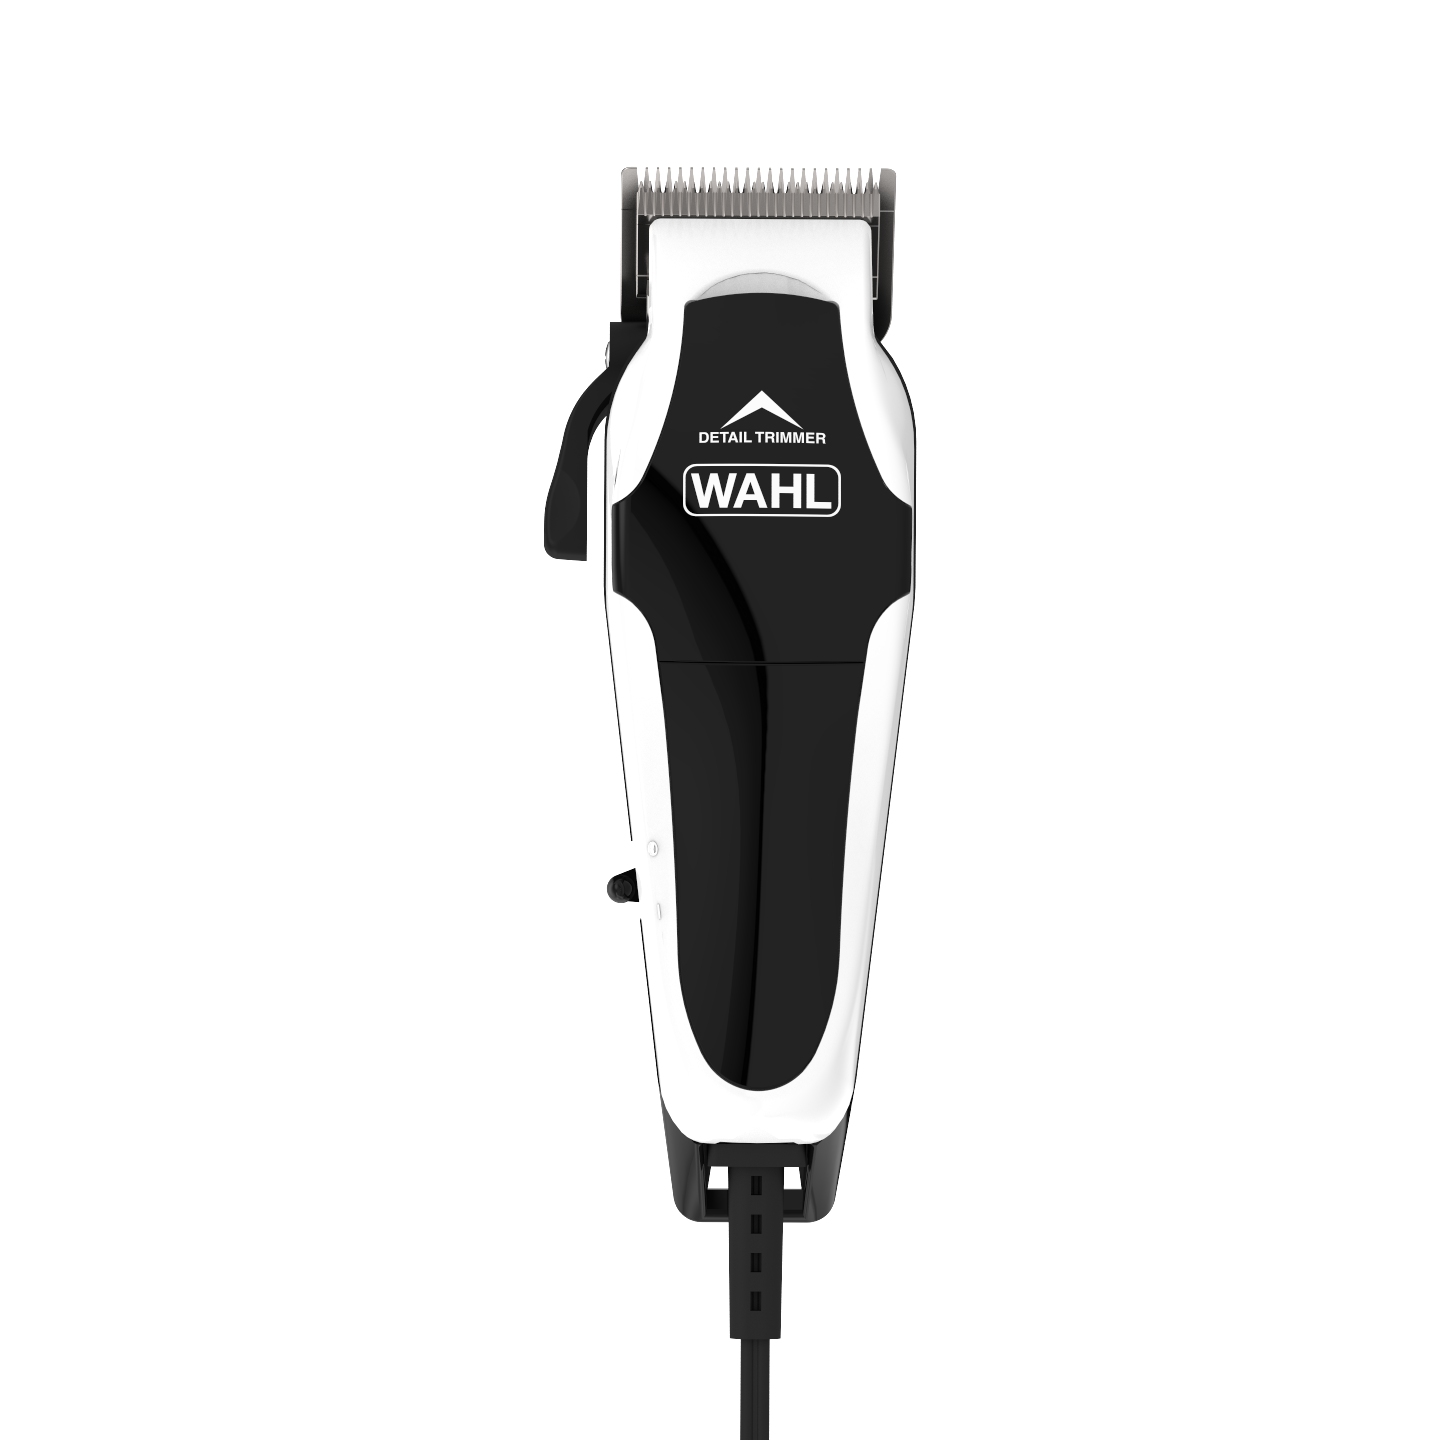 mains powered hair clippers